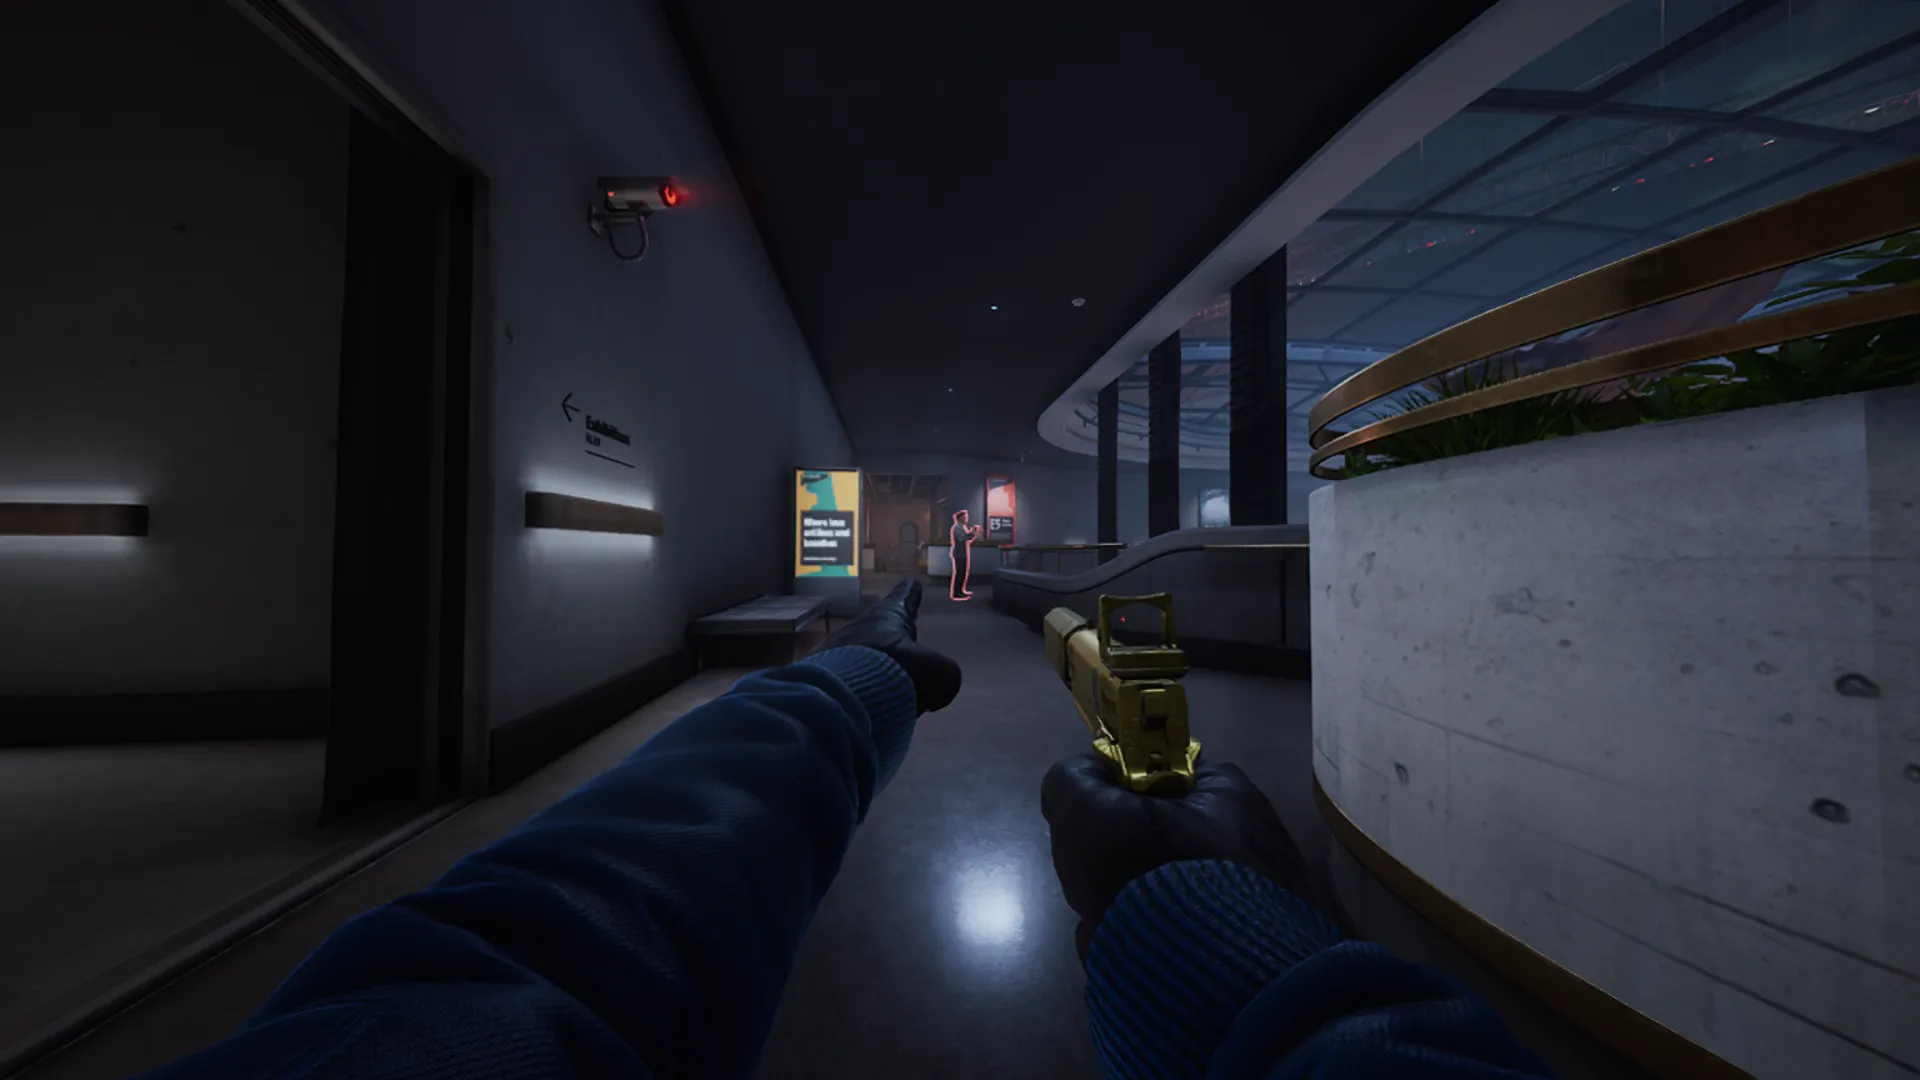 Payday 3 modders are already reworking the HUD that everyone hates